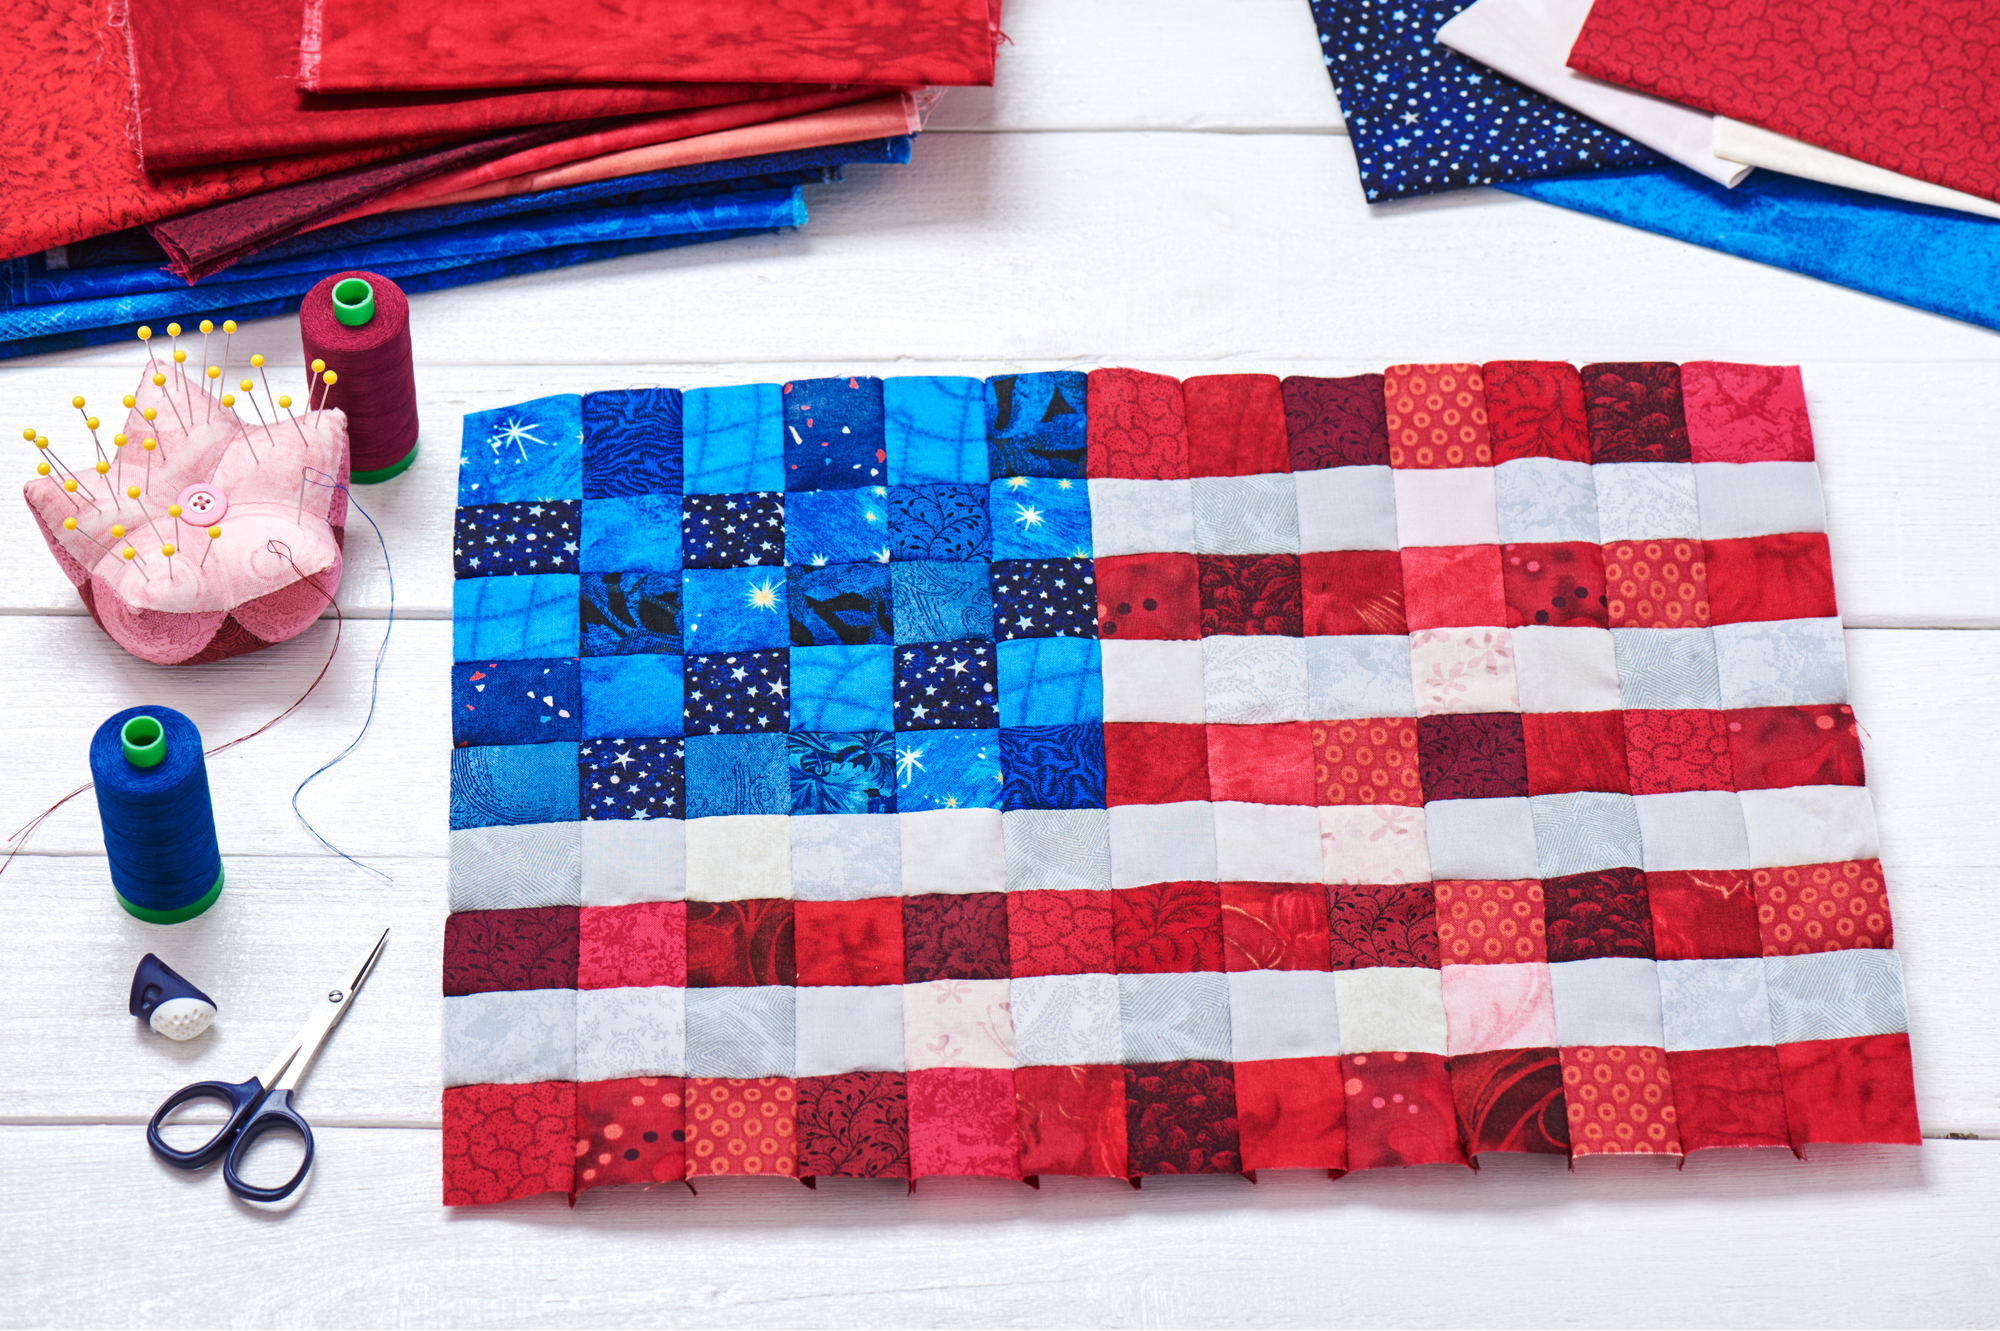 the fourth of july | fourth of july | 4th of july | crafts for the fourth of july | diy crafts | diy crafts for the fourth of july | diy | sewing | simple sew projects | sewing projects 